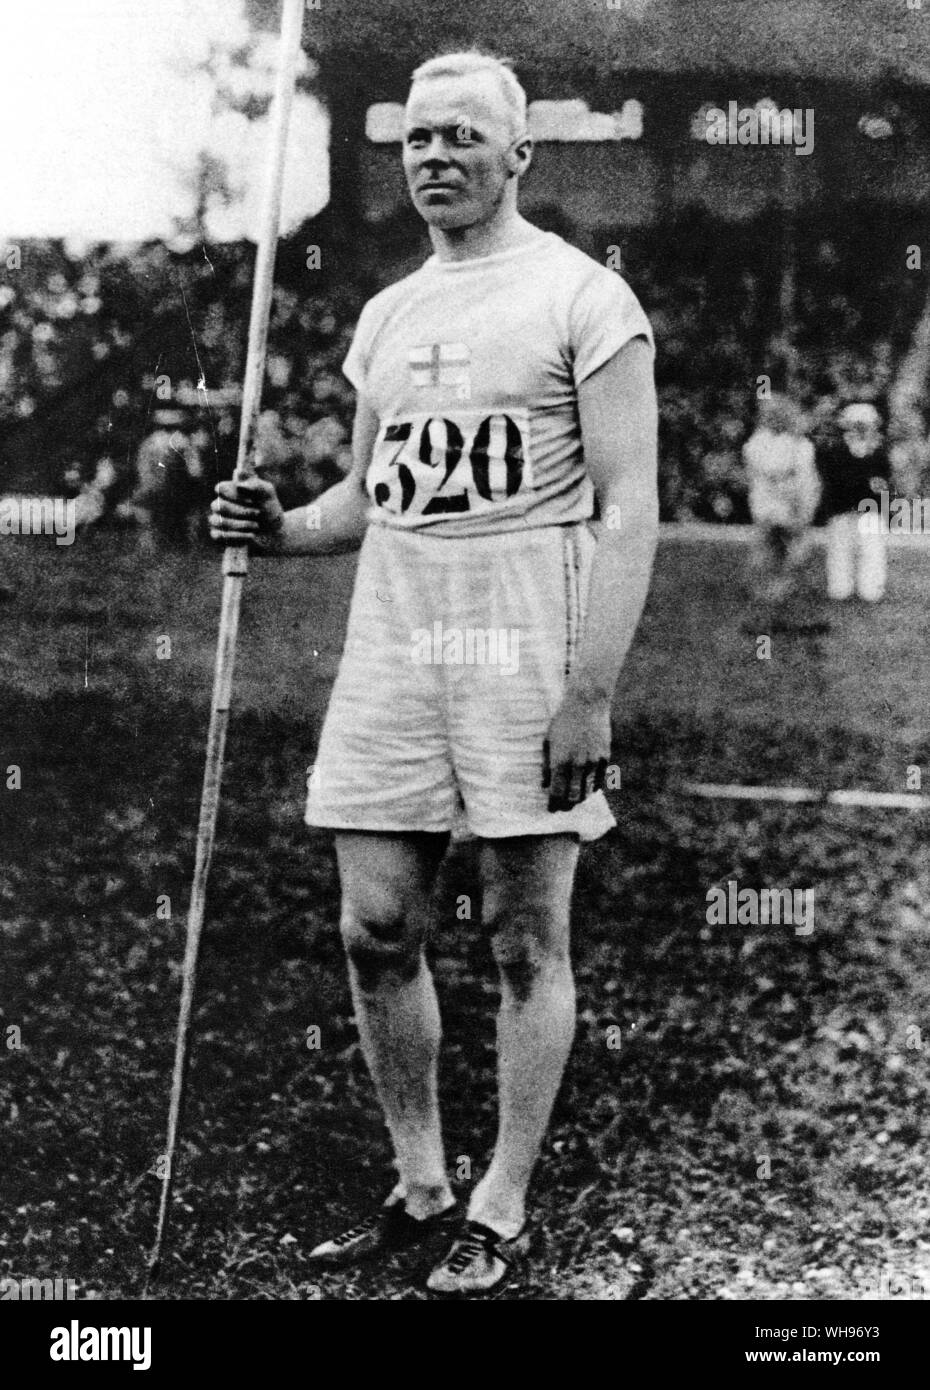 France, Paris Olympics, 1924: Jonni Myrra of Finland, who competed in the javelin.. Stock Photo